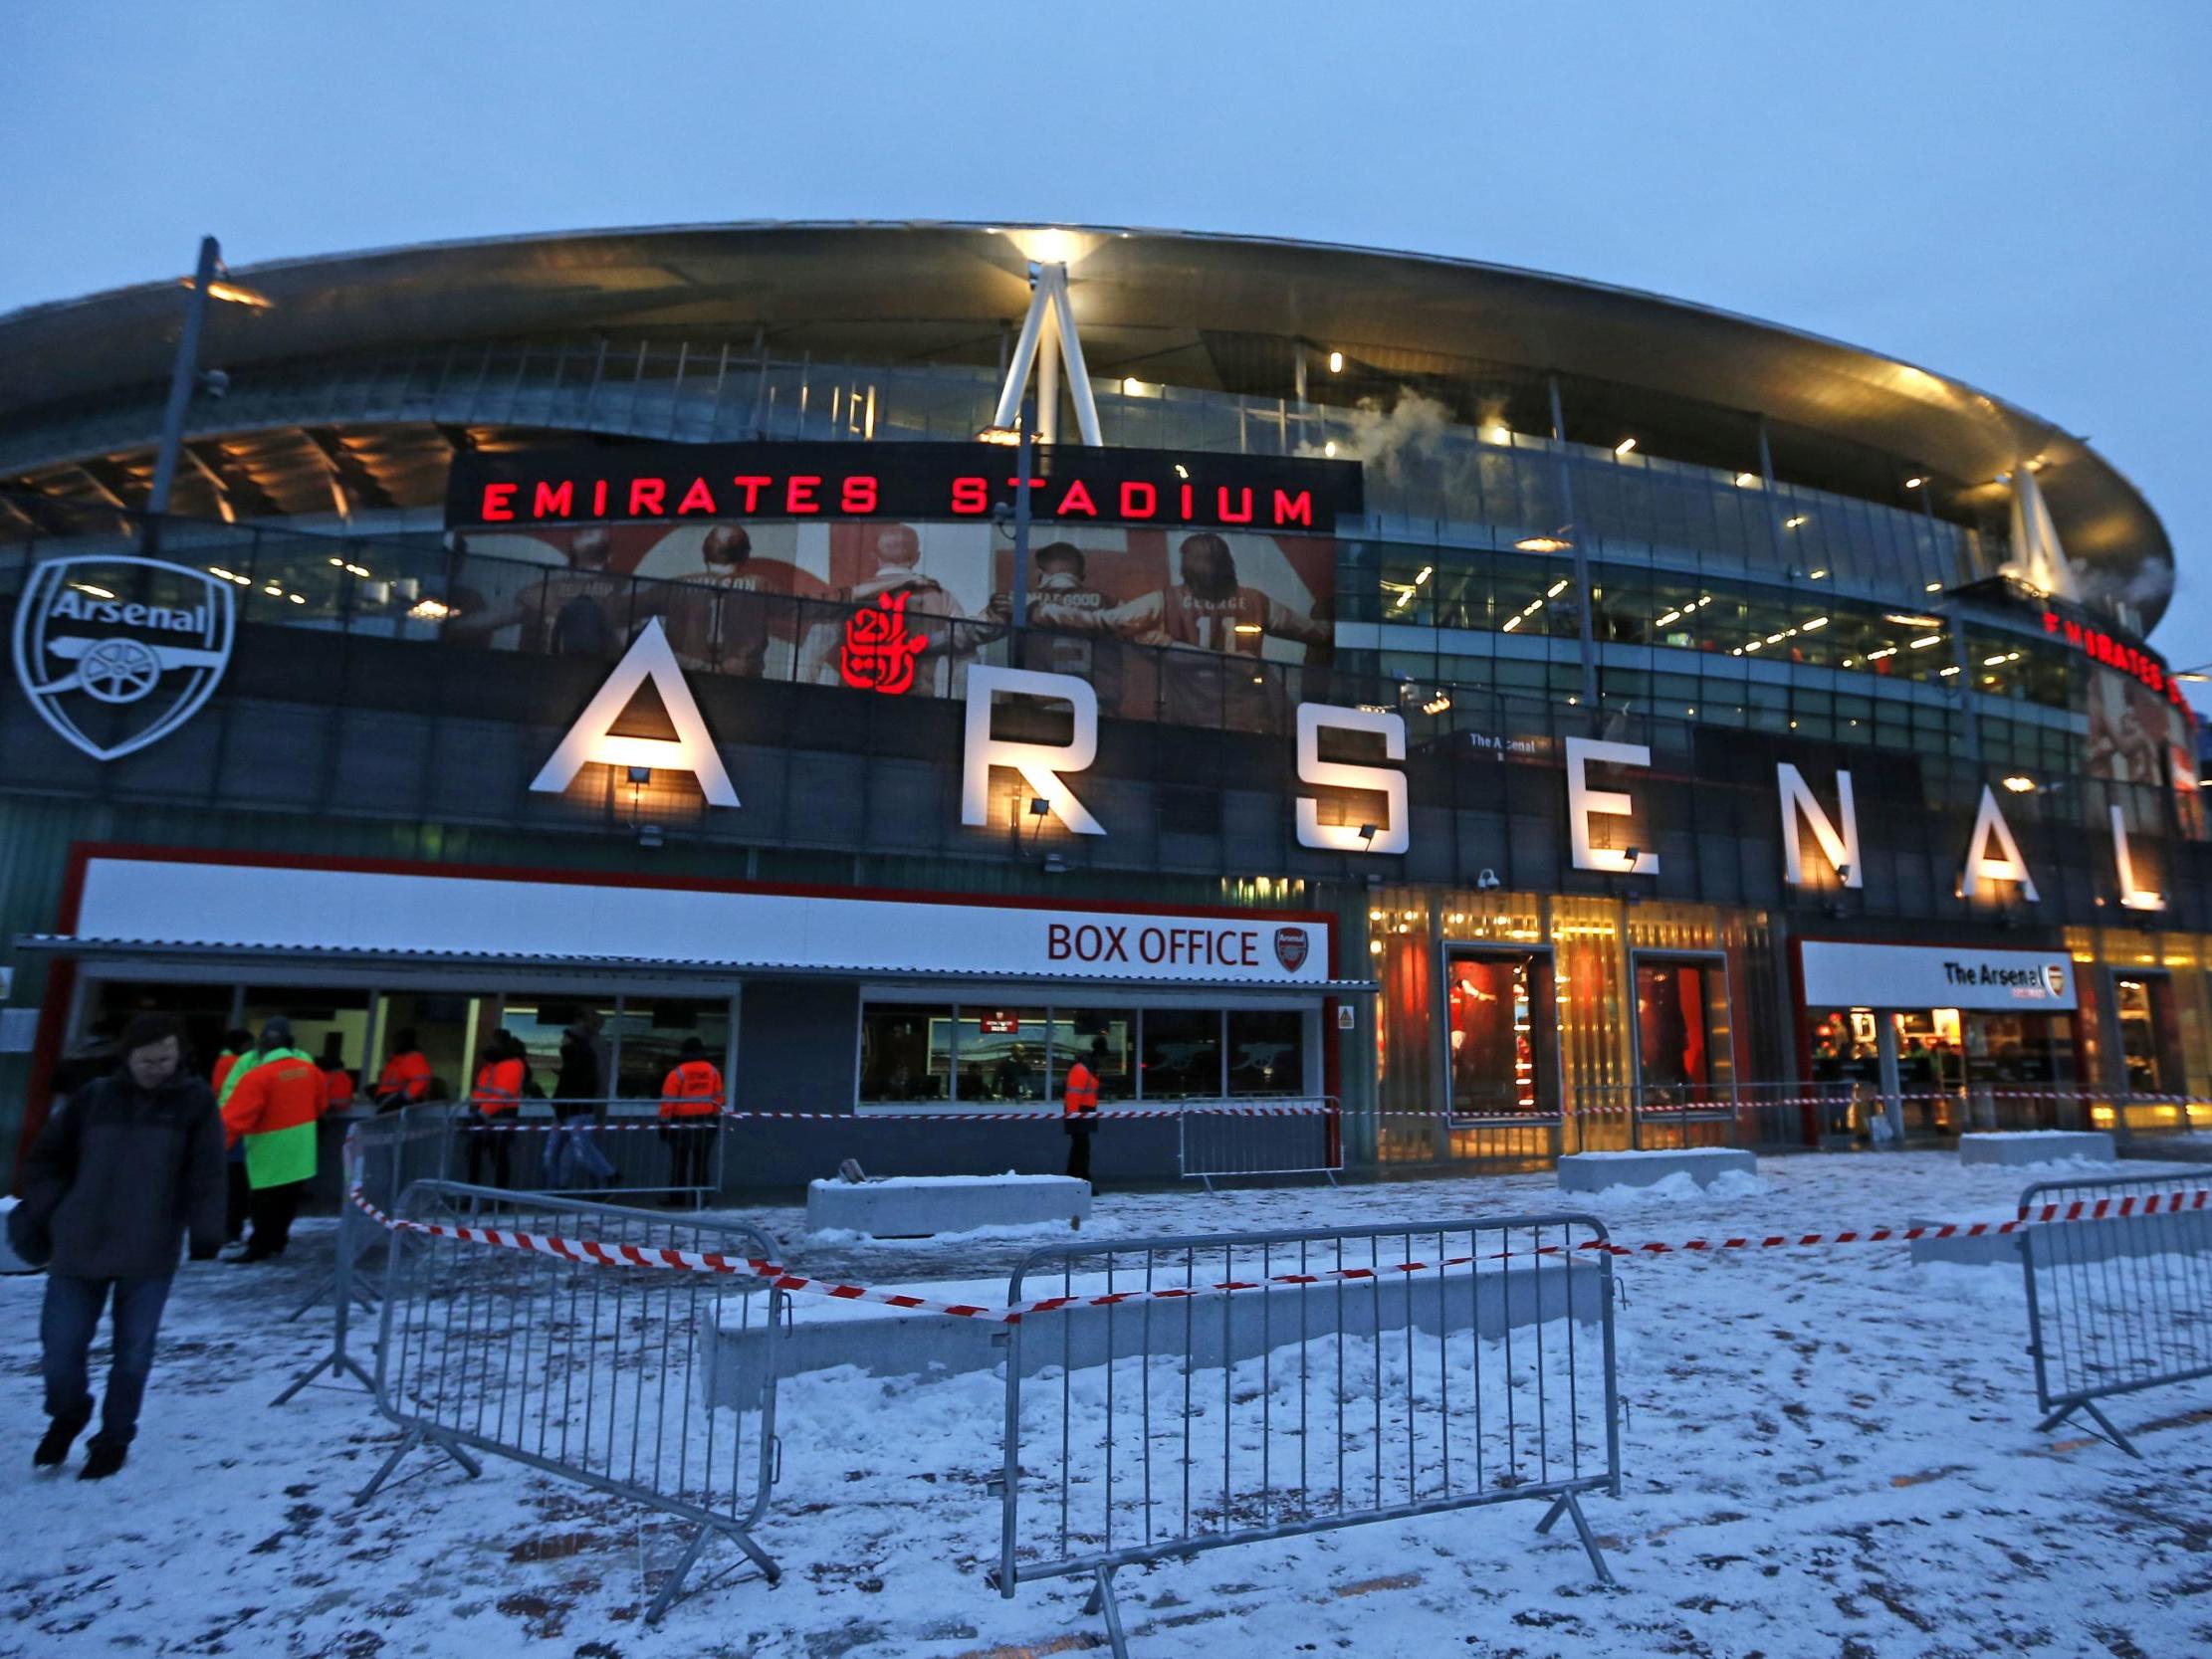 The snow-covered area outside the Emirates Stadium